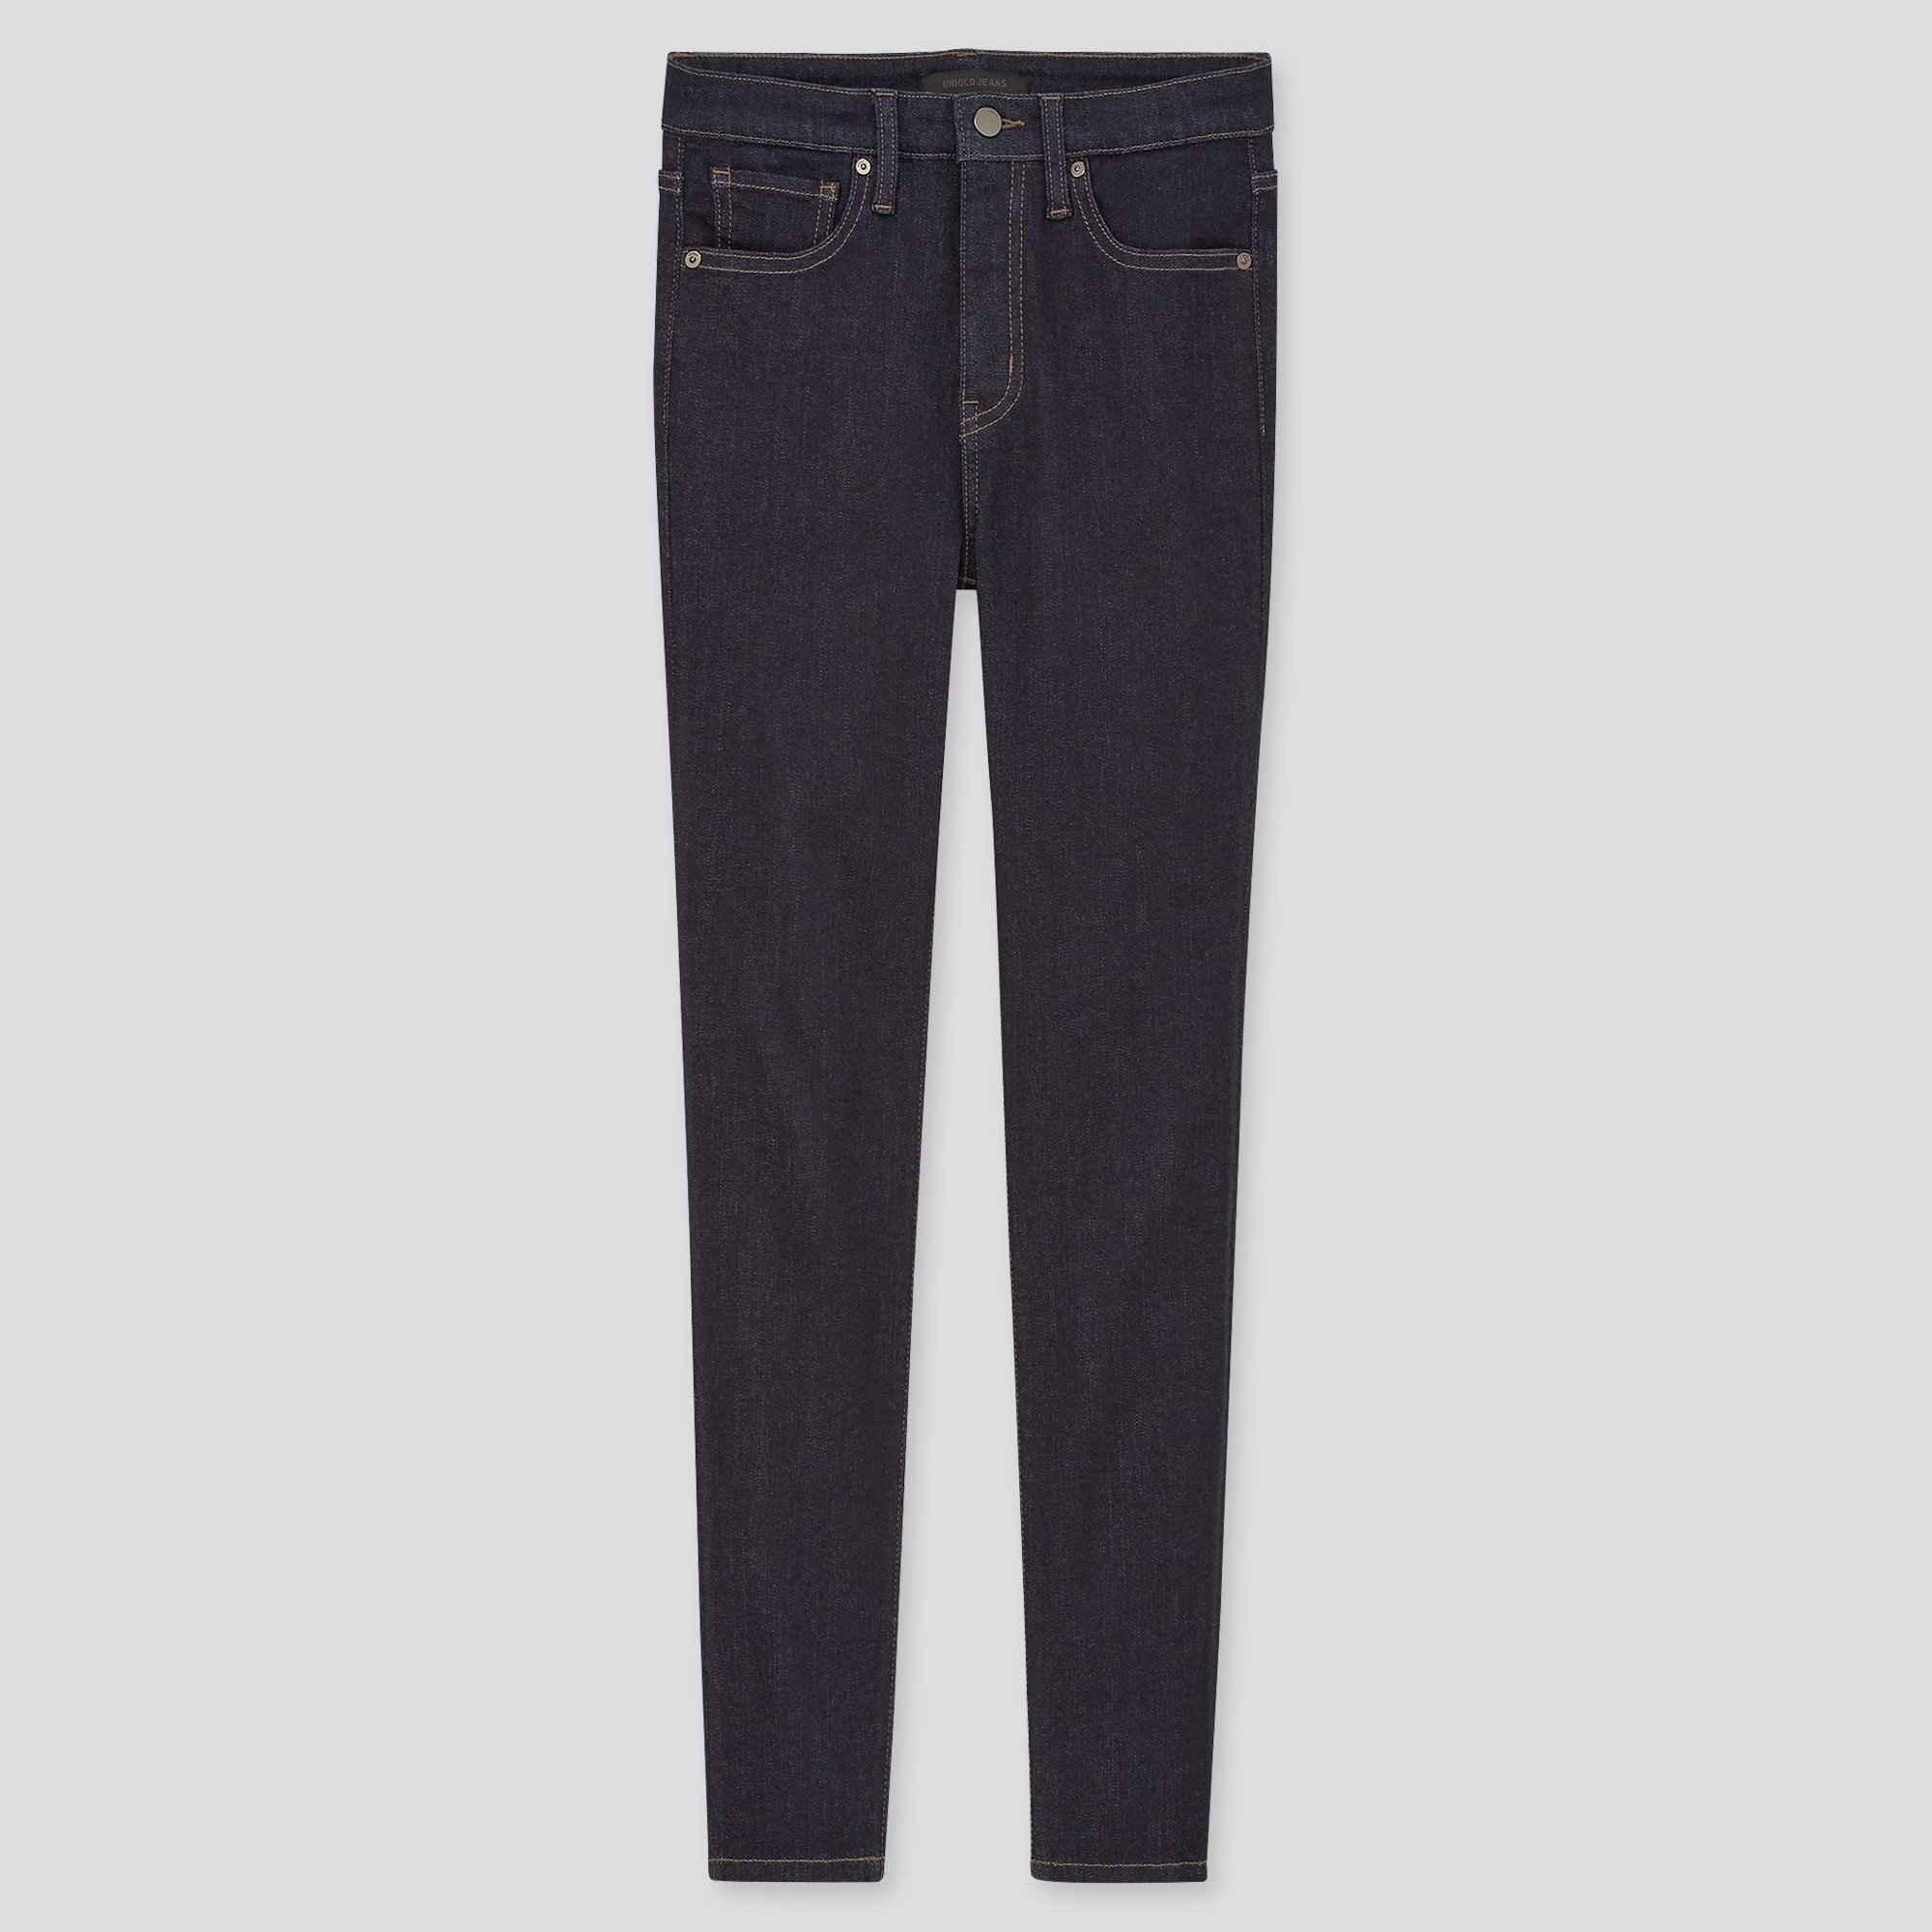 ankle length slim fit jeans